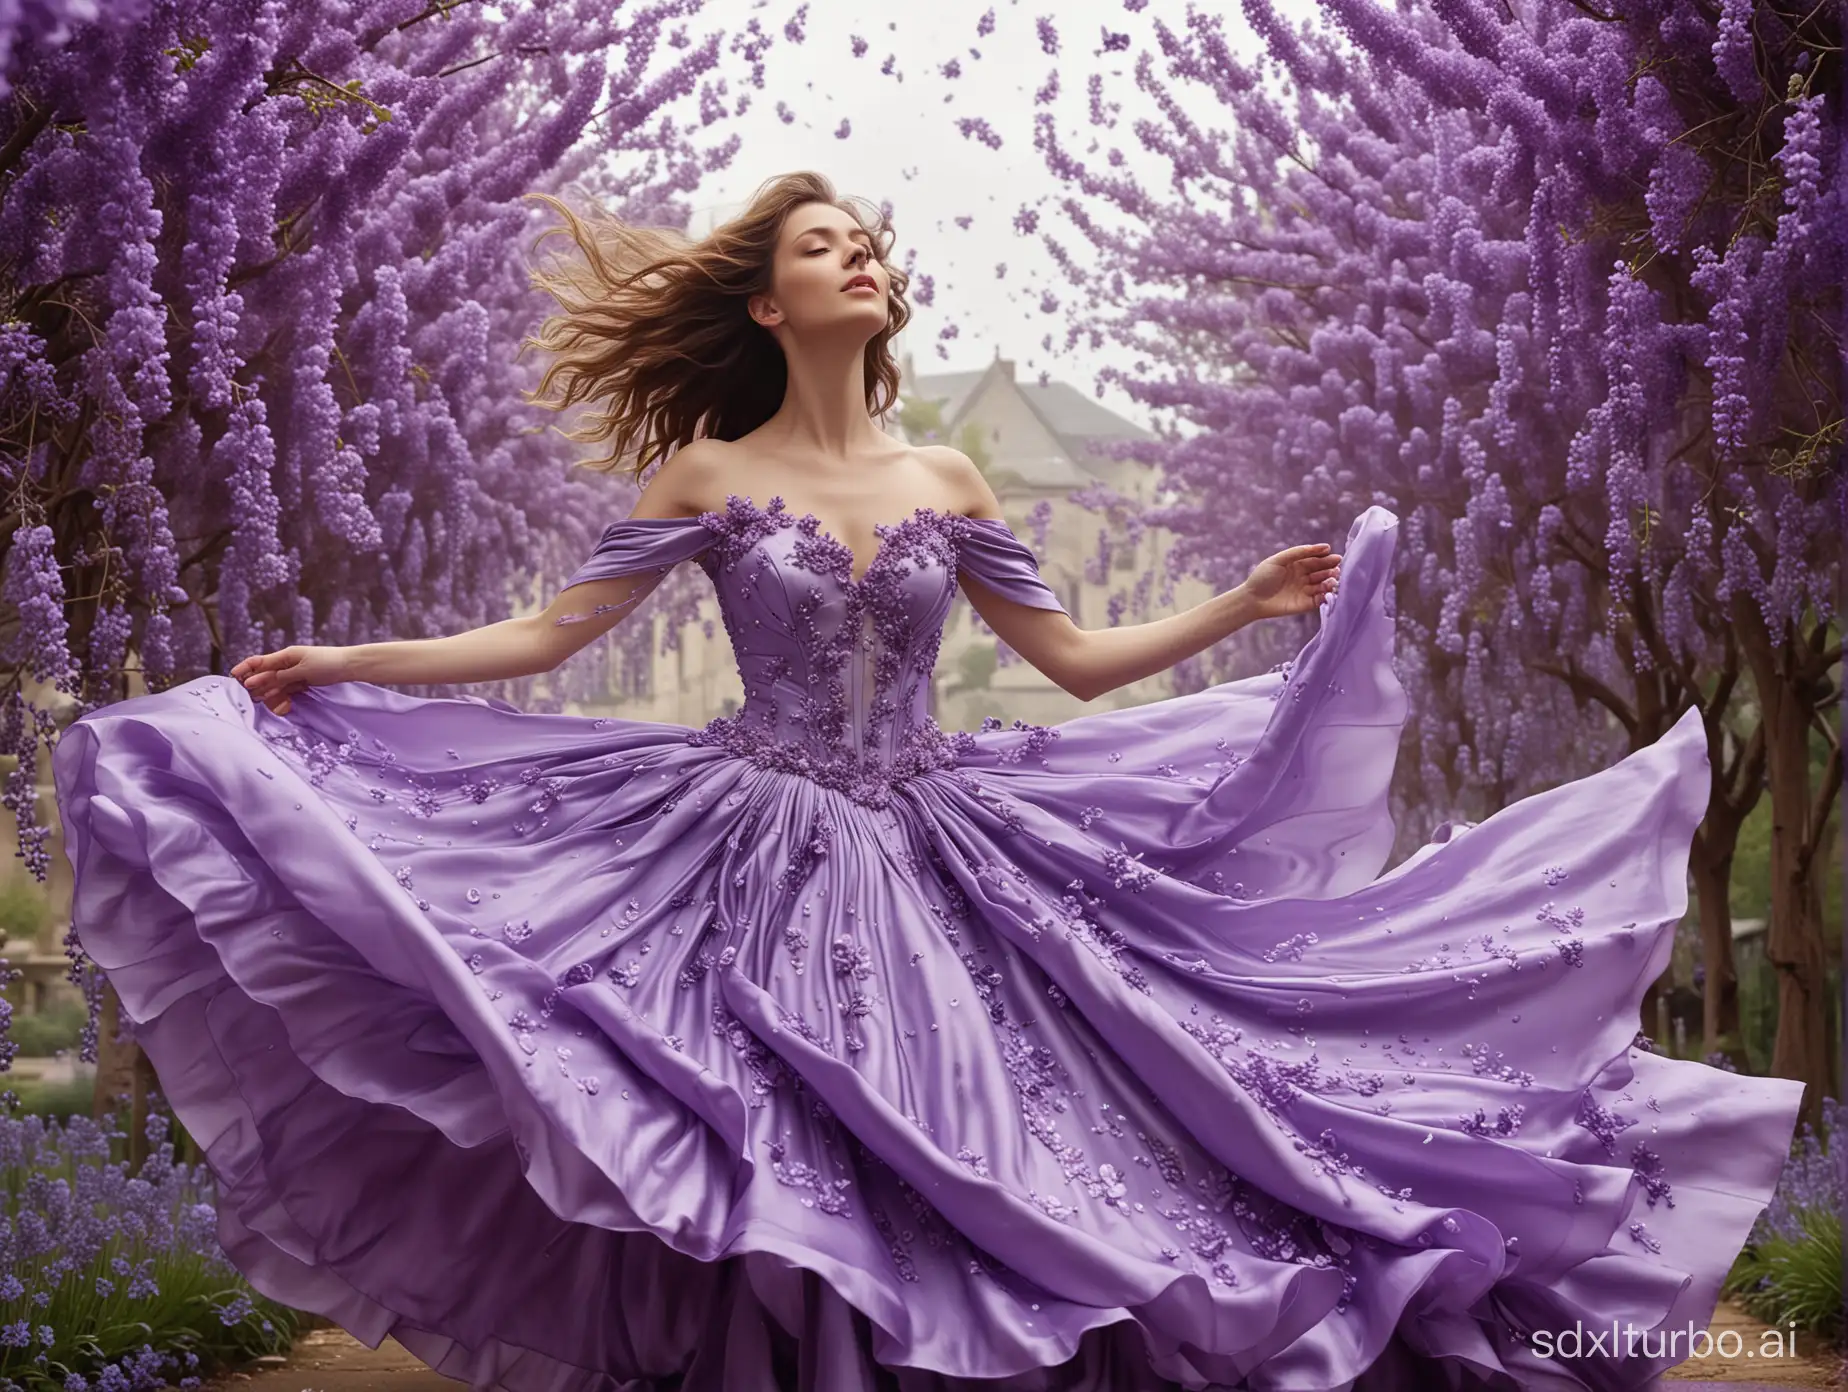 Petals drifting in the air, details, award-winning masterpiece, non-representational, expression of emotion, rich in imagination, highly detailed, highly detailed, a gown formed by the fusion of purple satin and petals, floating in mid-air, a female model in formal shots, lavender, wisteria, violets, blooming flowers and skirts